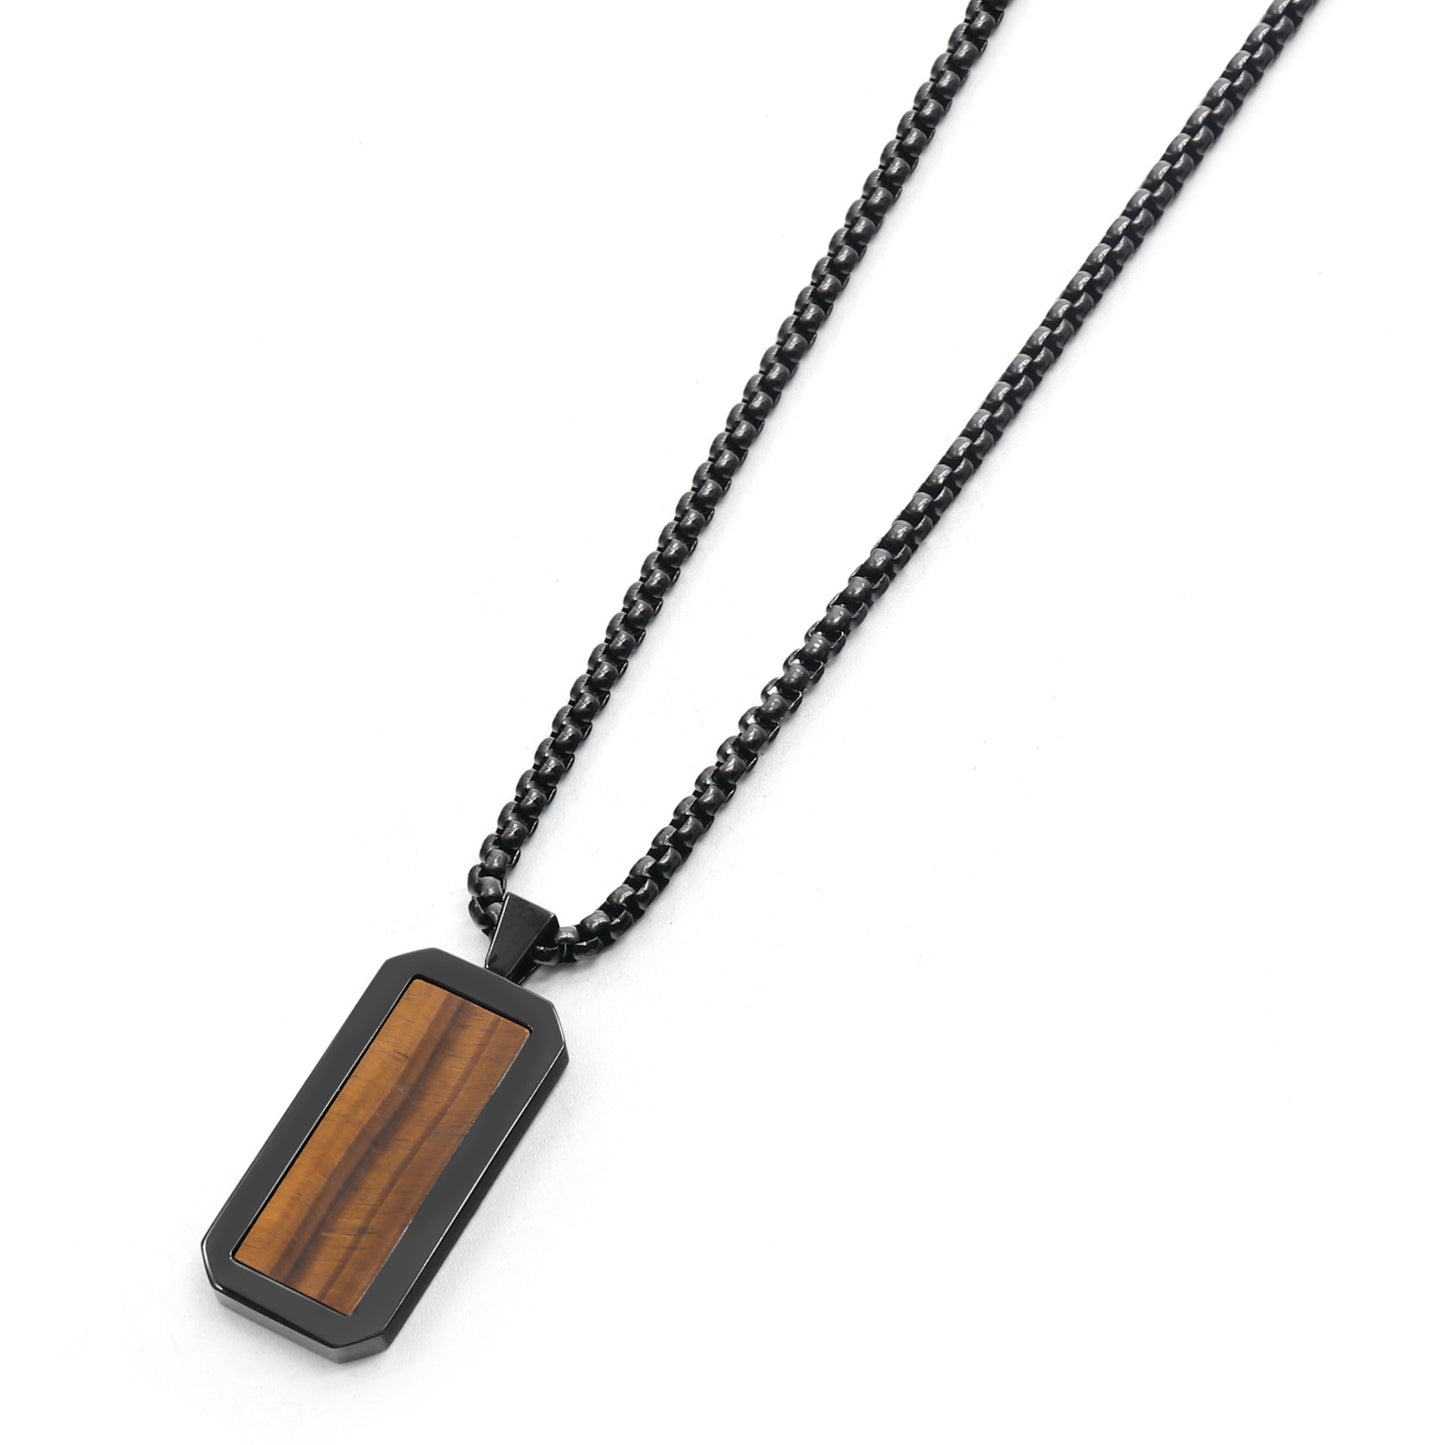 Necklaces - Black Necklace With Rectangle Tiger Eye Pendant